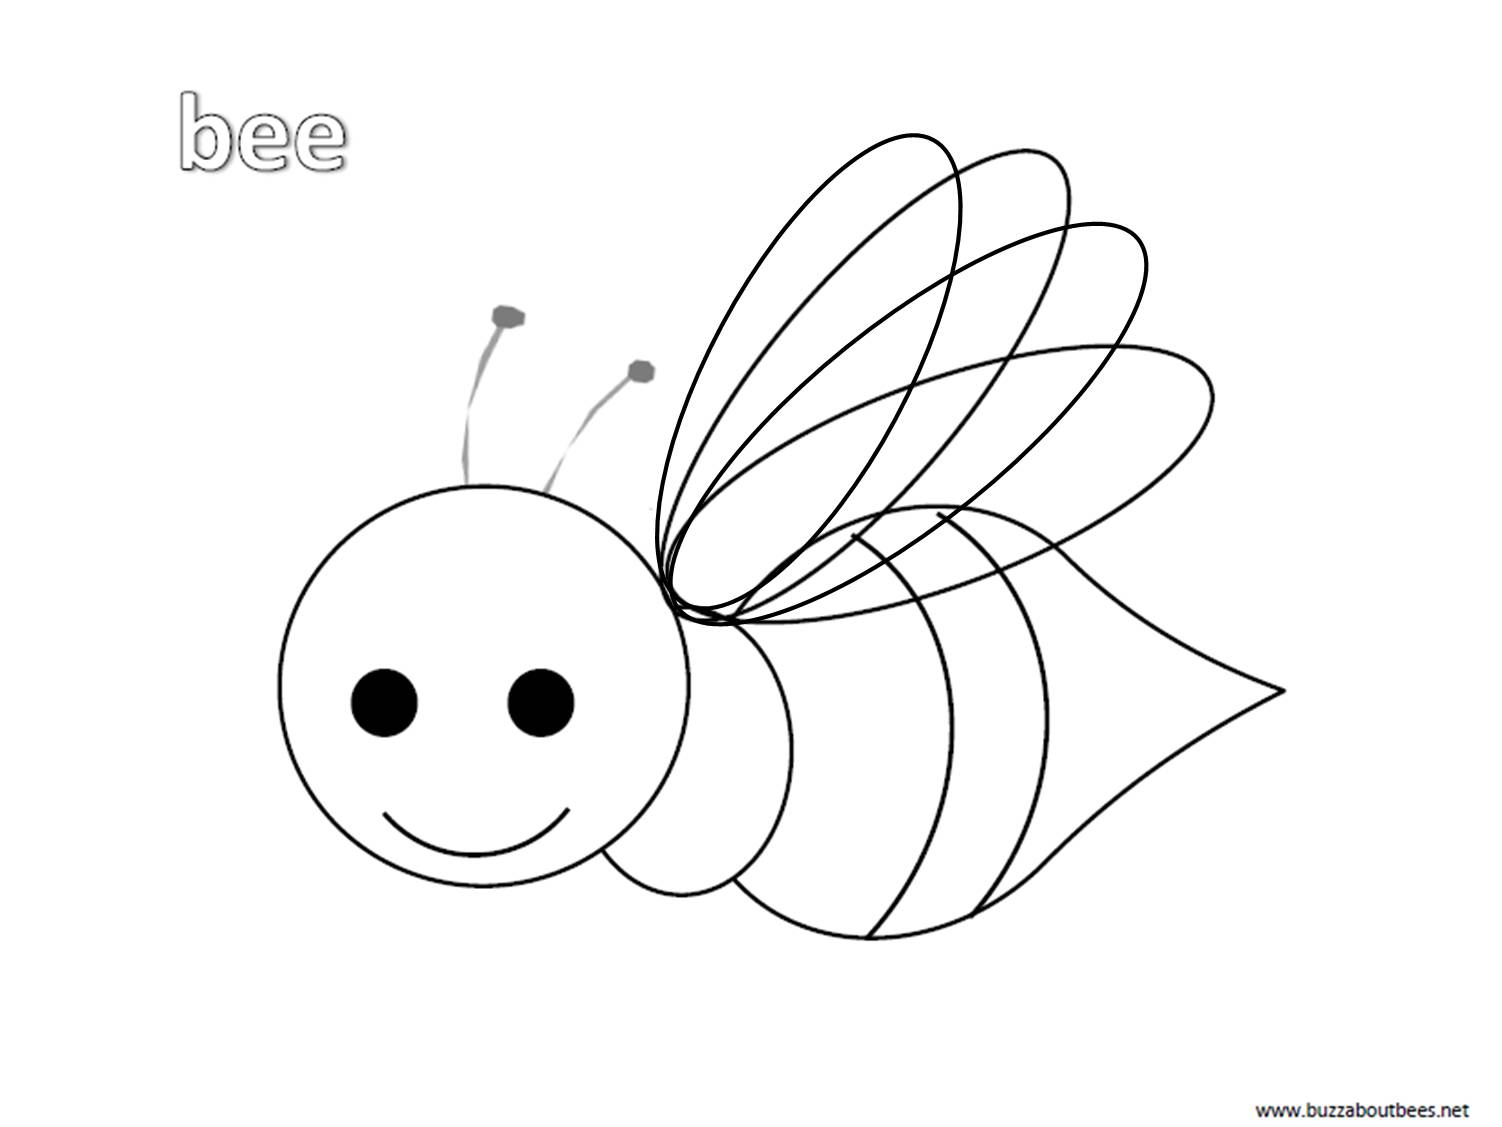 Bee Coloring Pages, Educational Activity sheets And Puzzles Free To Download